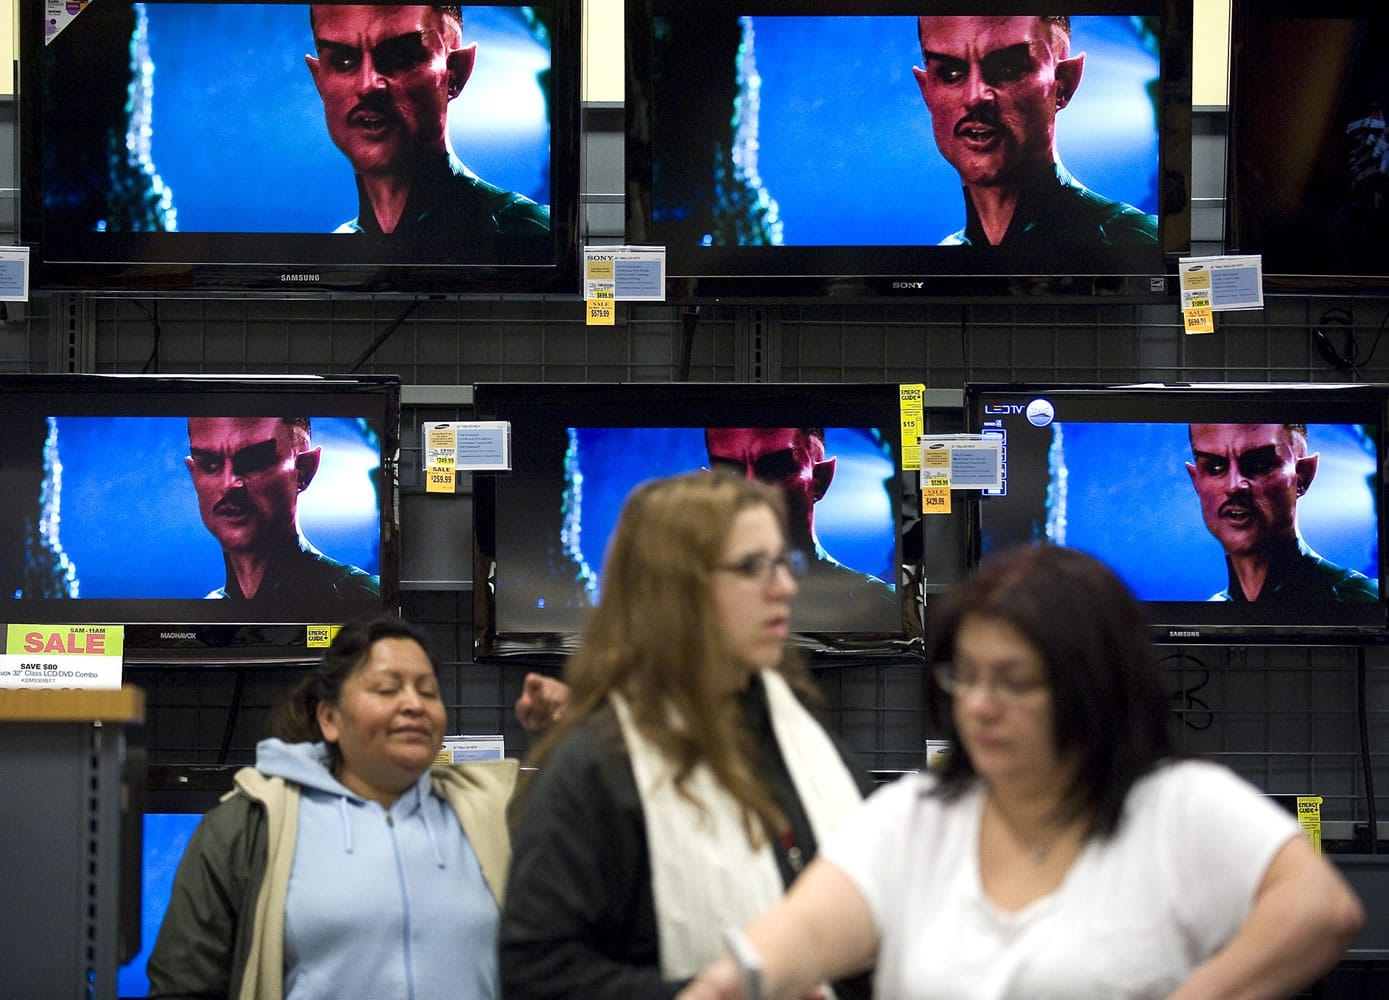 Shoppers browse the Fred Meyer electronics department during Black Friday sales.